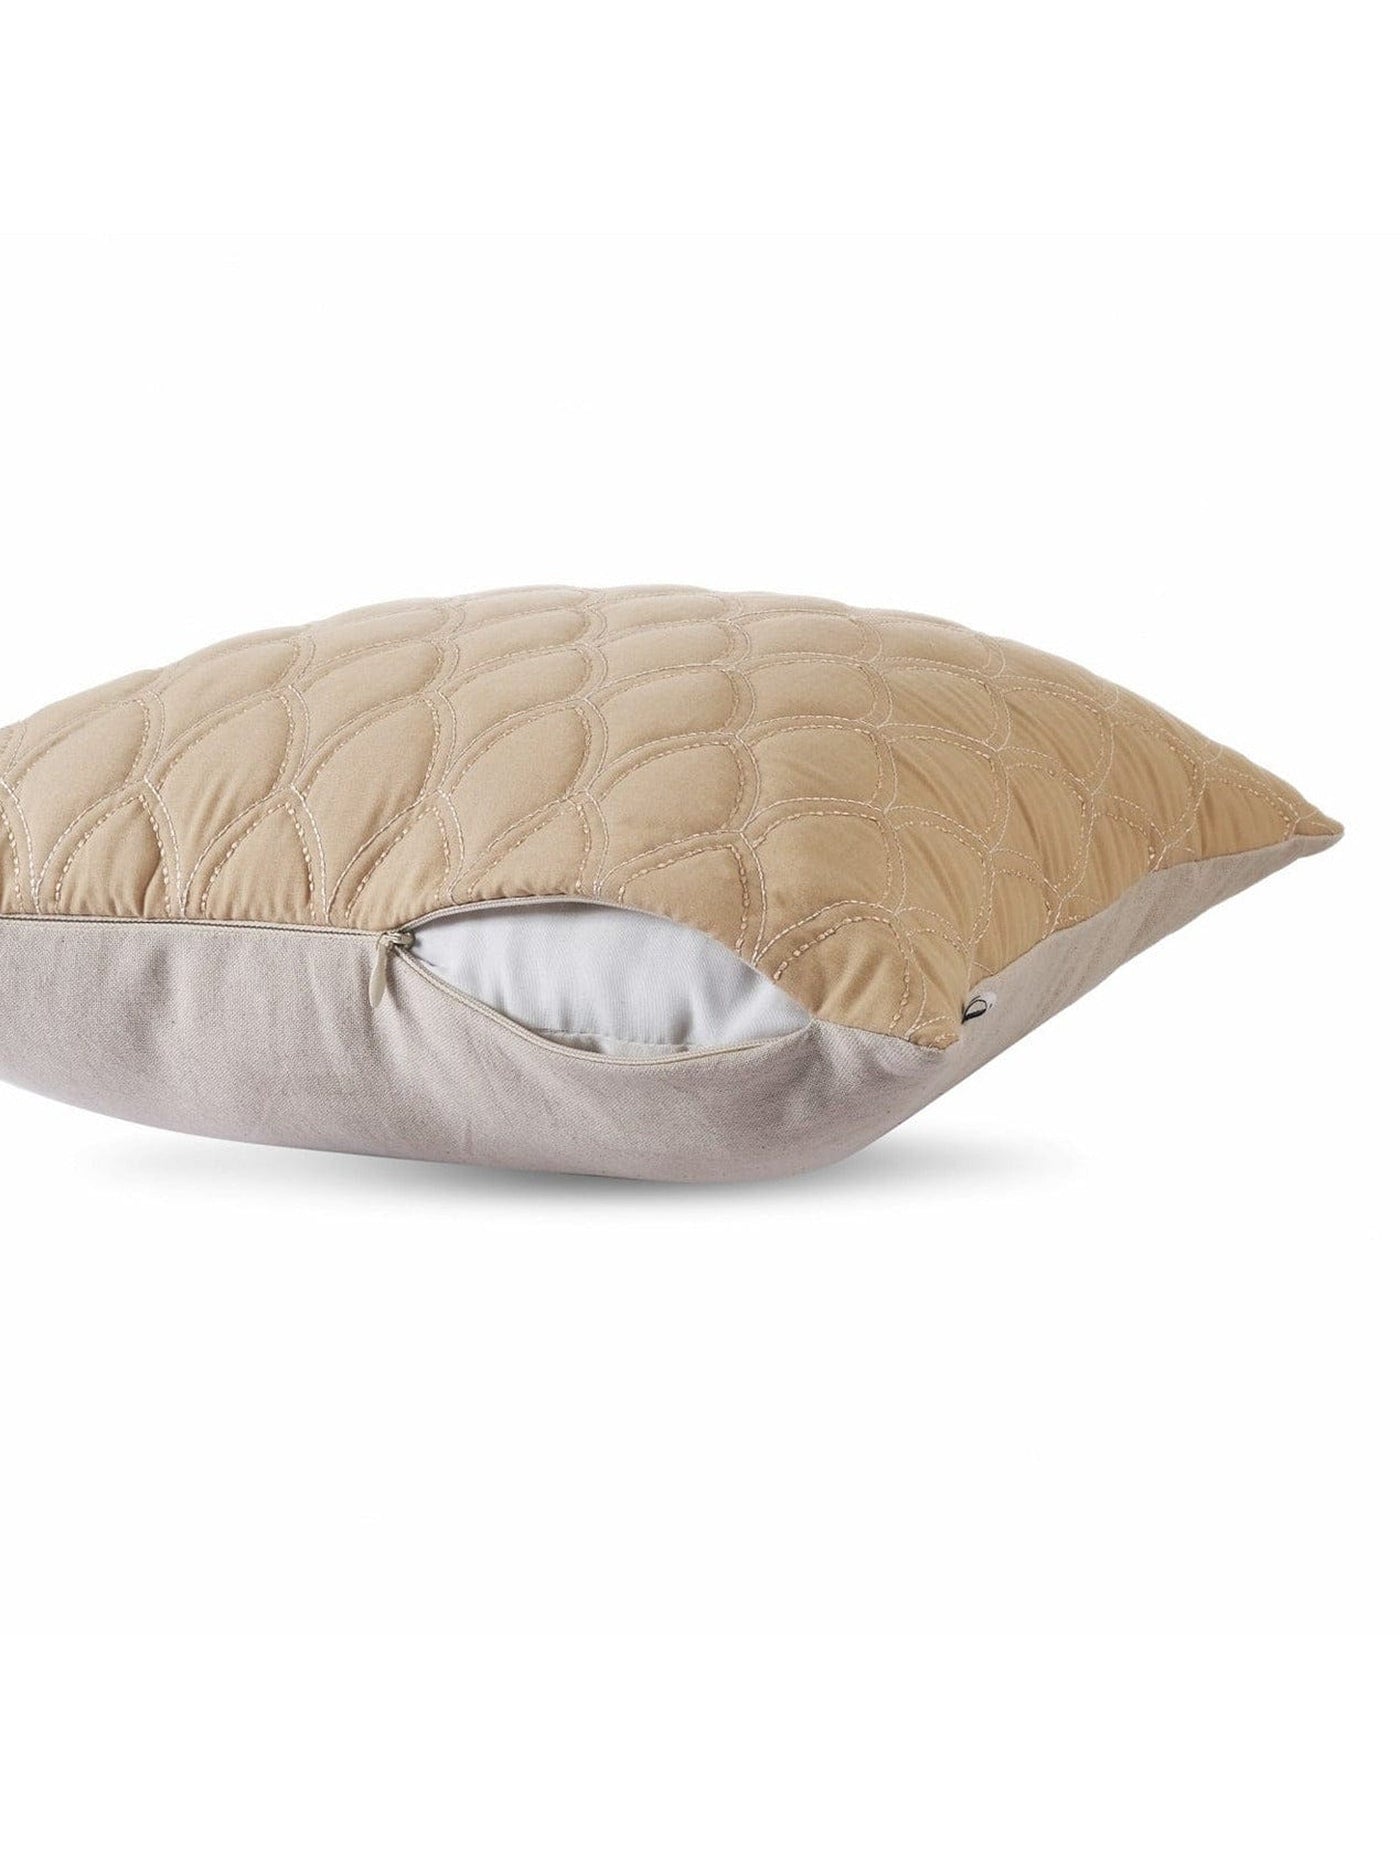 Cushion Cover - Archway Quilted Sand